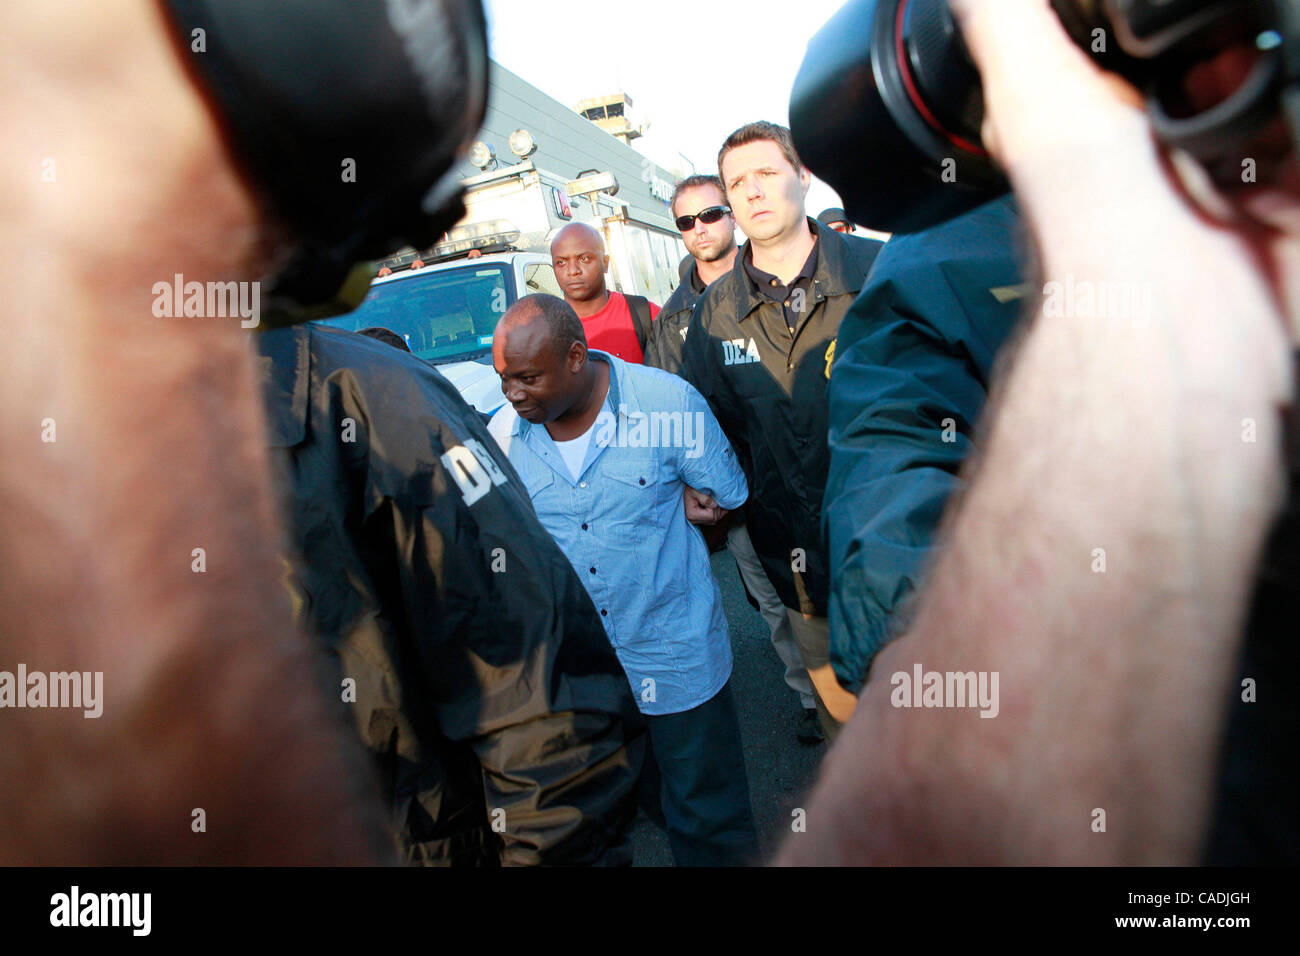 Jun 24, 2010 - White Plains, New York, USA - Jamaican gang leader and drug lord CHRISTOPHER 'DUDUS' COKE, 42, is escorted by DEA agents from the Avitat terminal at the Westchester County airport to a waiting vehicle. Coke arrived in the United States after being extradited from Jamaica to face drug  Stock Photo